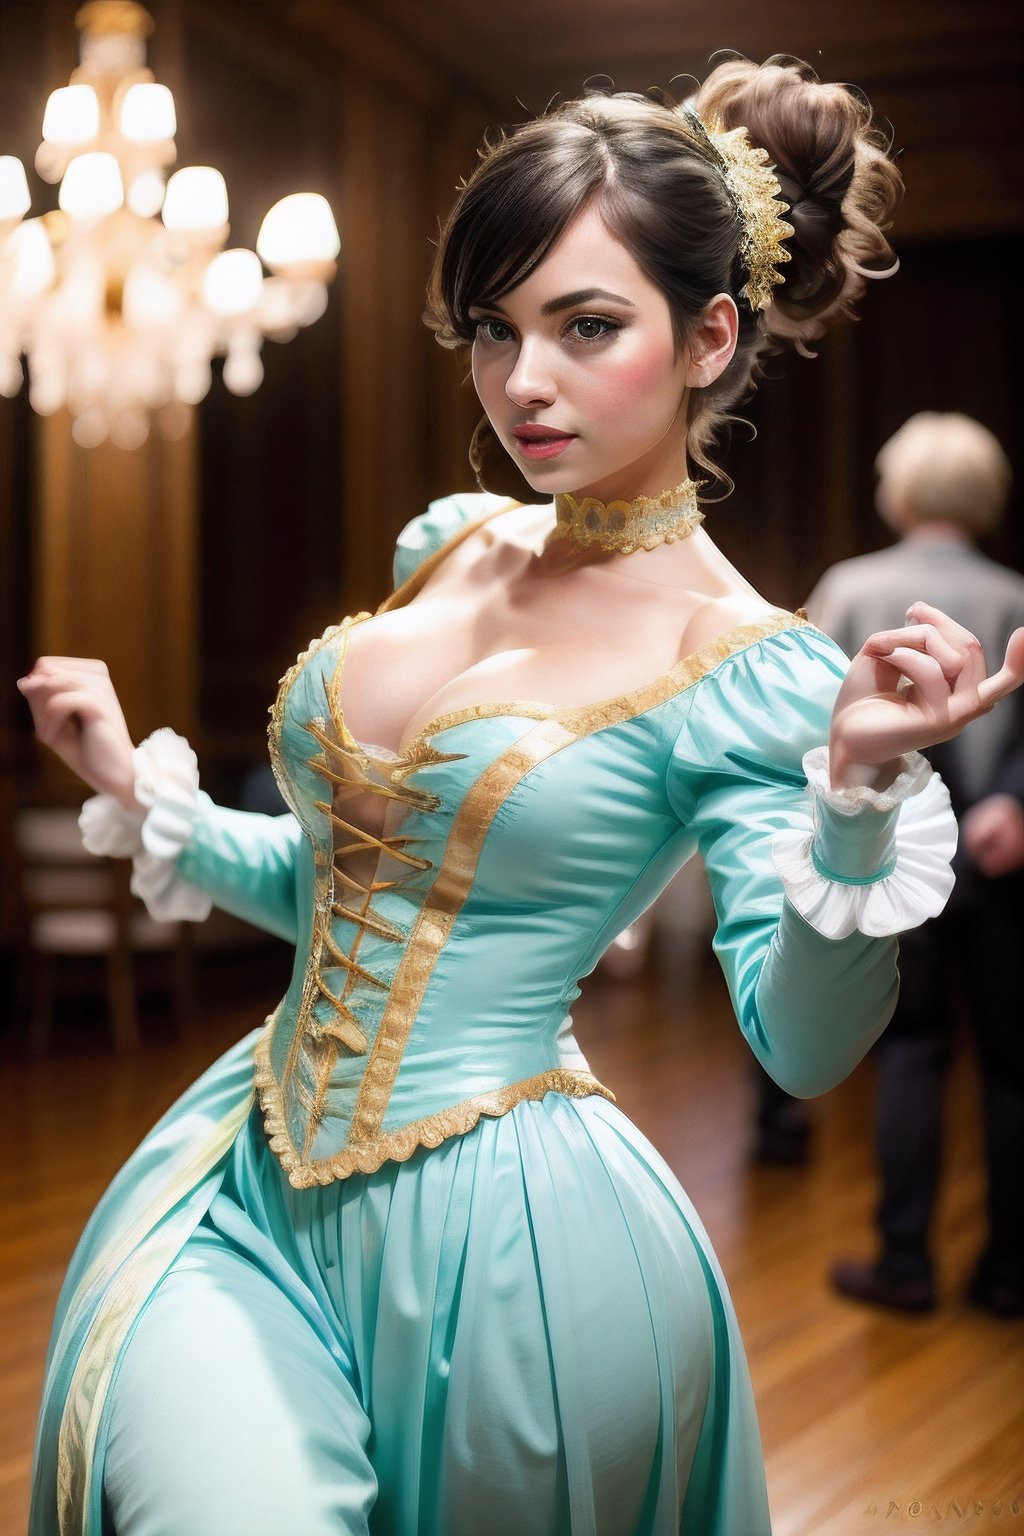 Realistic, Beautiful Women, dance party, Rococo Style